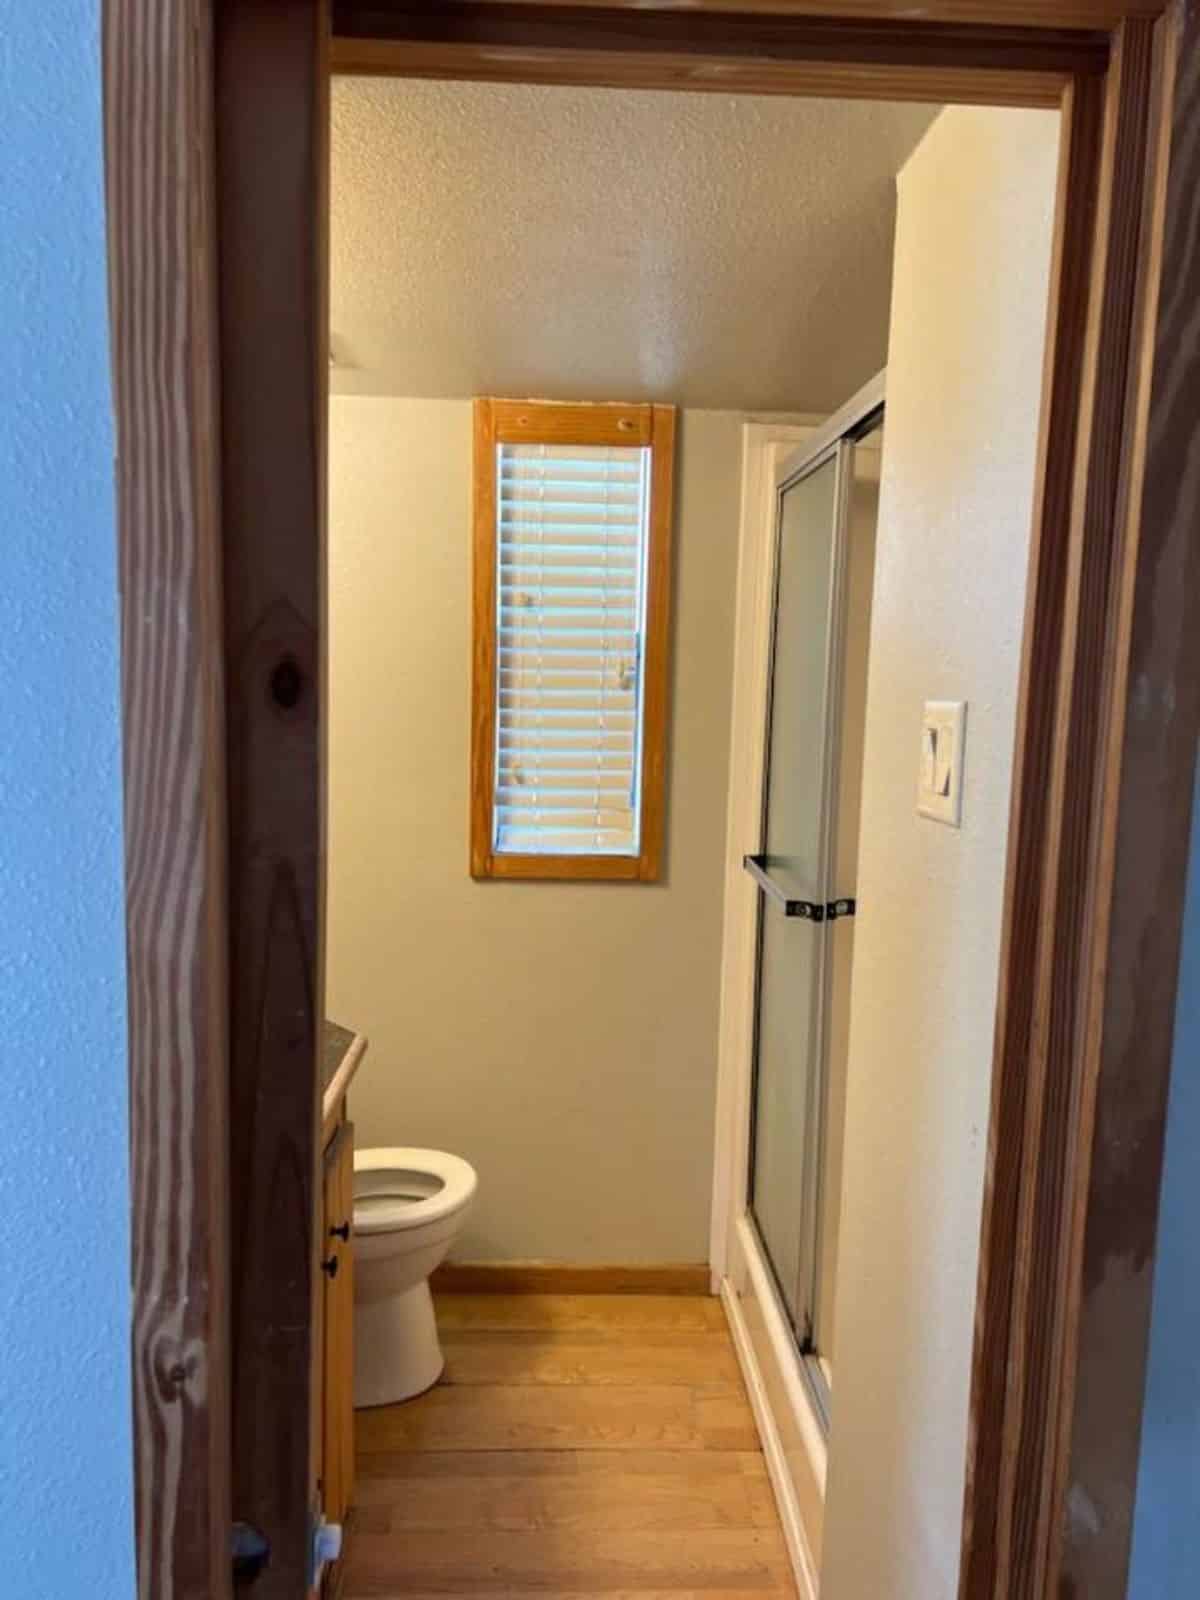 Separate shower area, standard toilet and sink in bathroom of 40’ Tiny Home